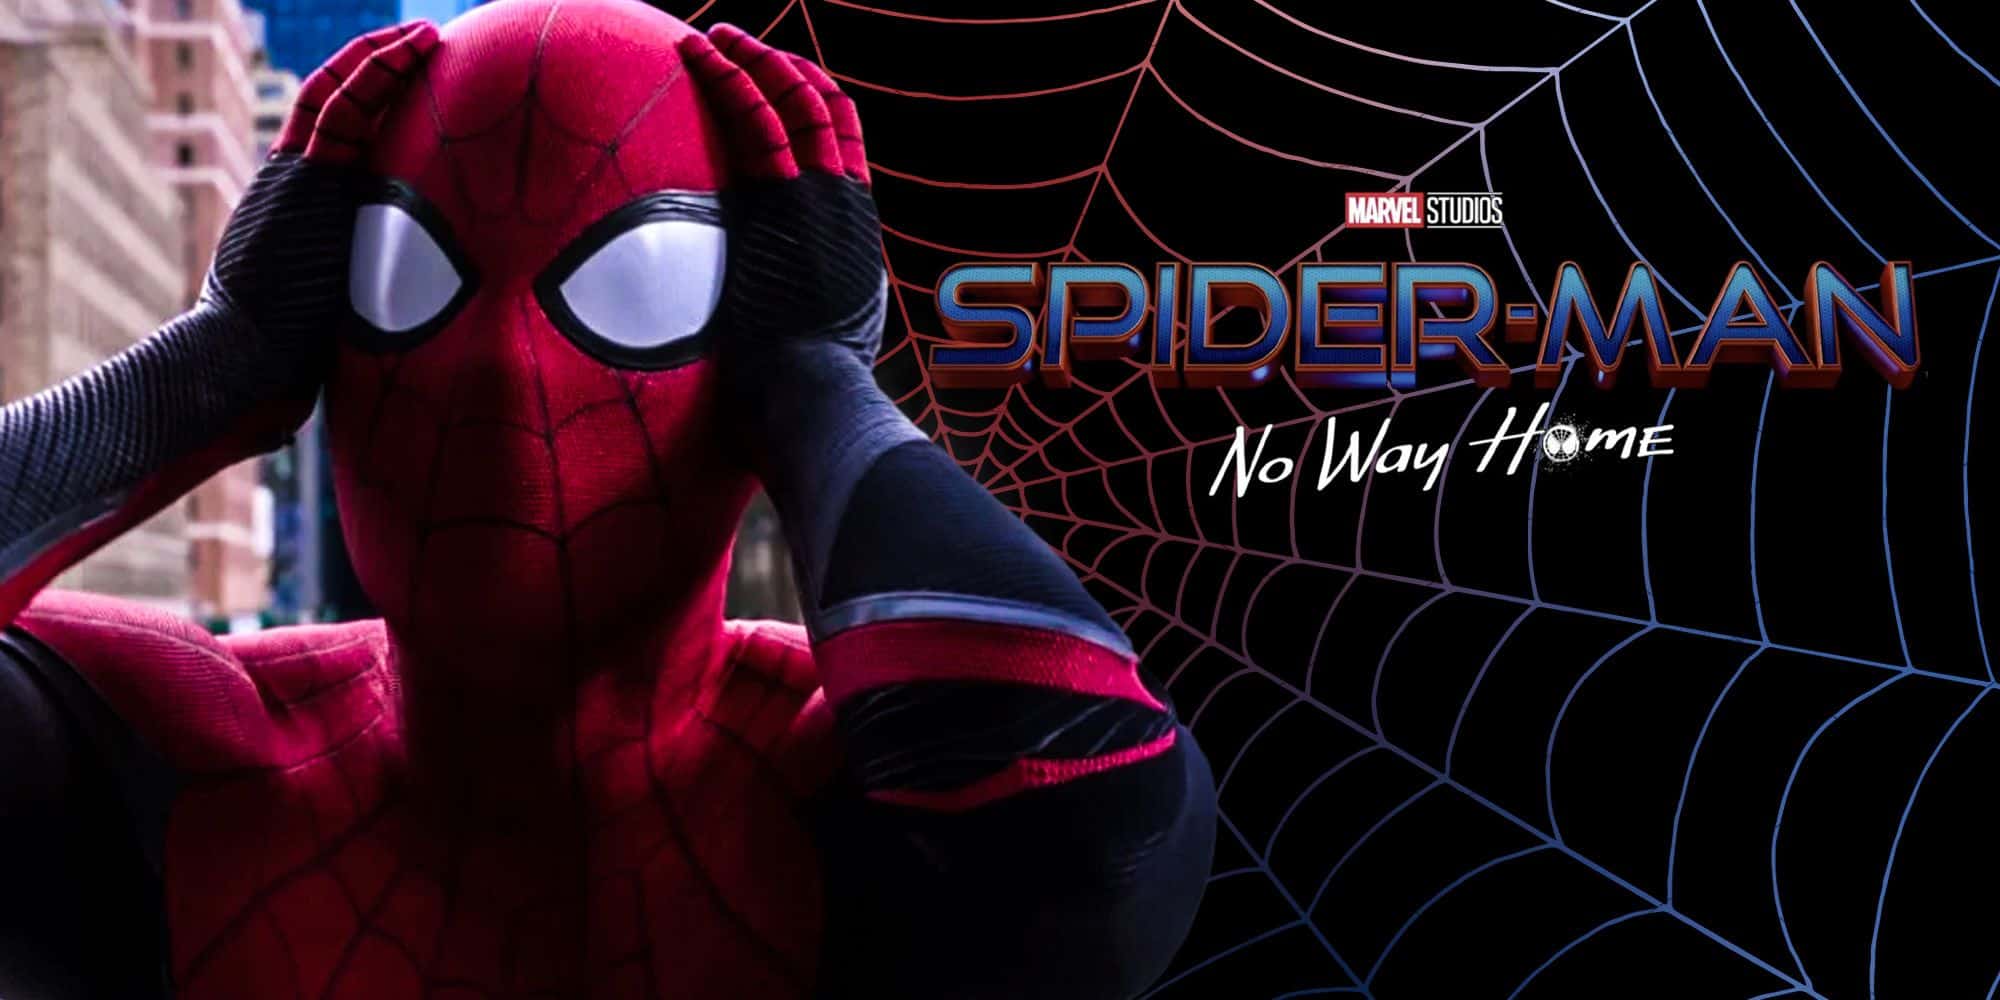 Marvel's SPIDERMAN NO WAY HOME Trailer Drops At Last! Comic Watch